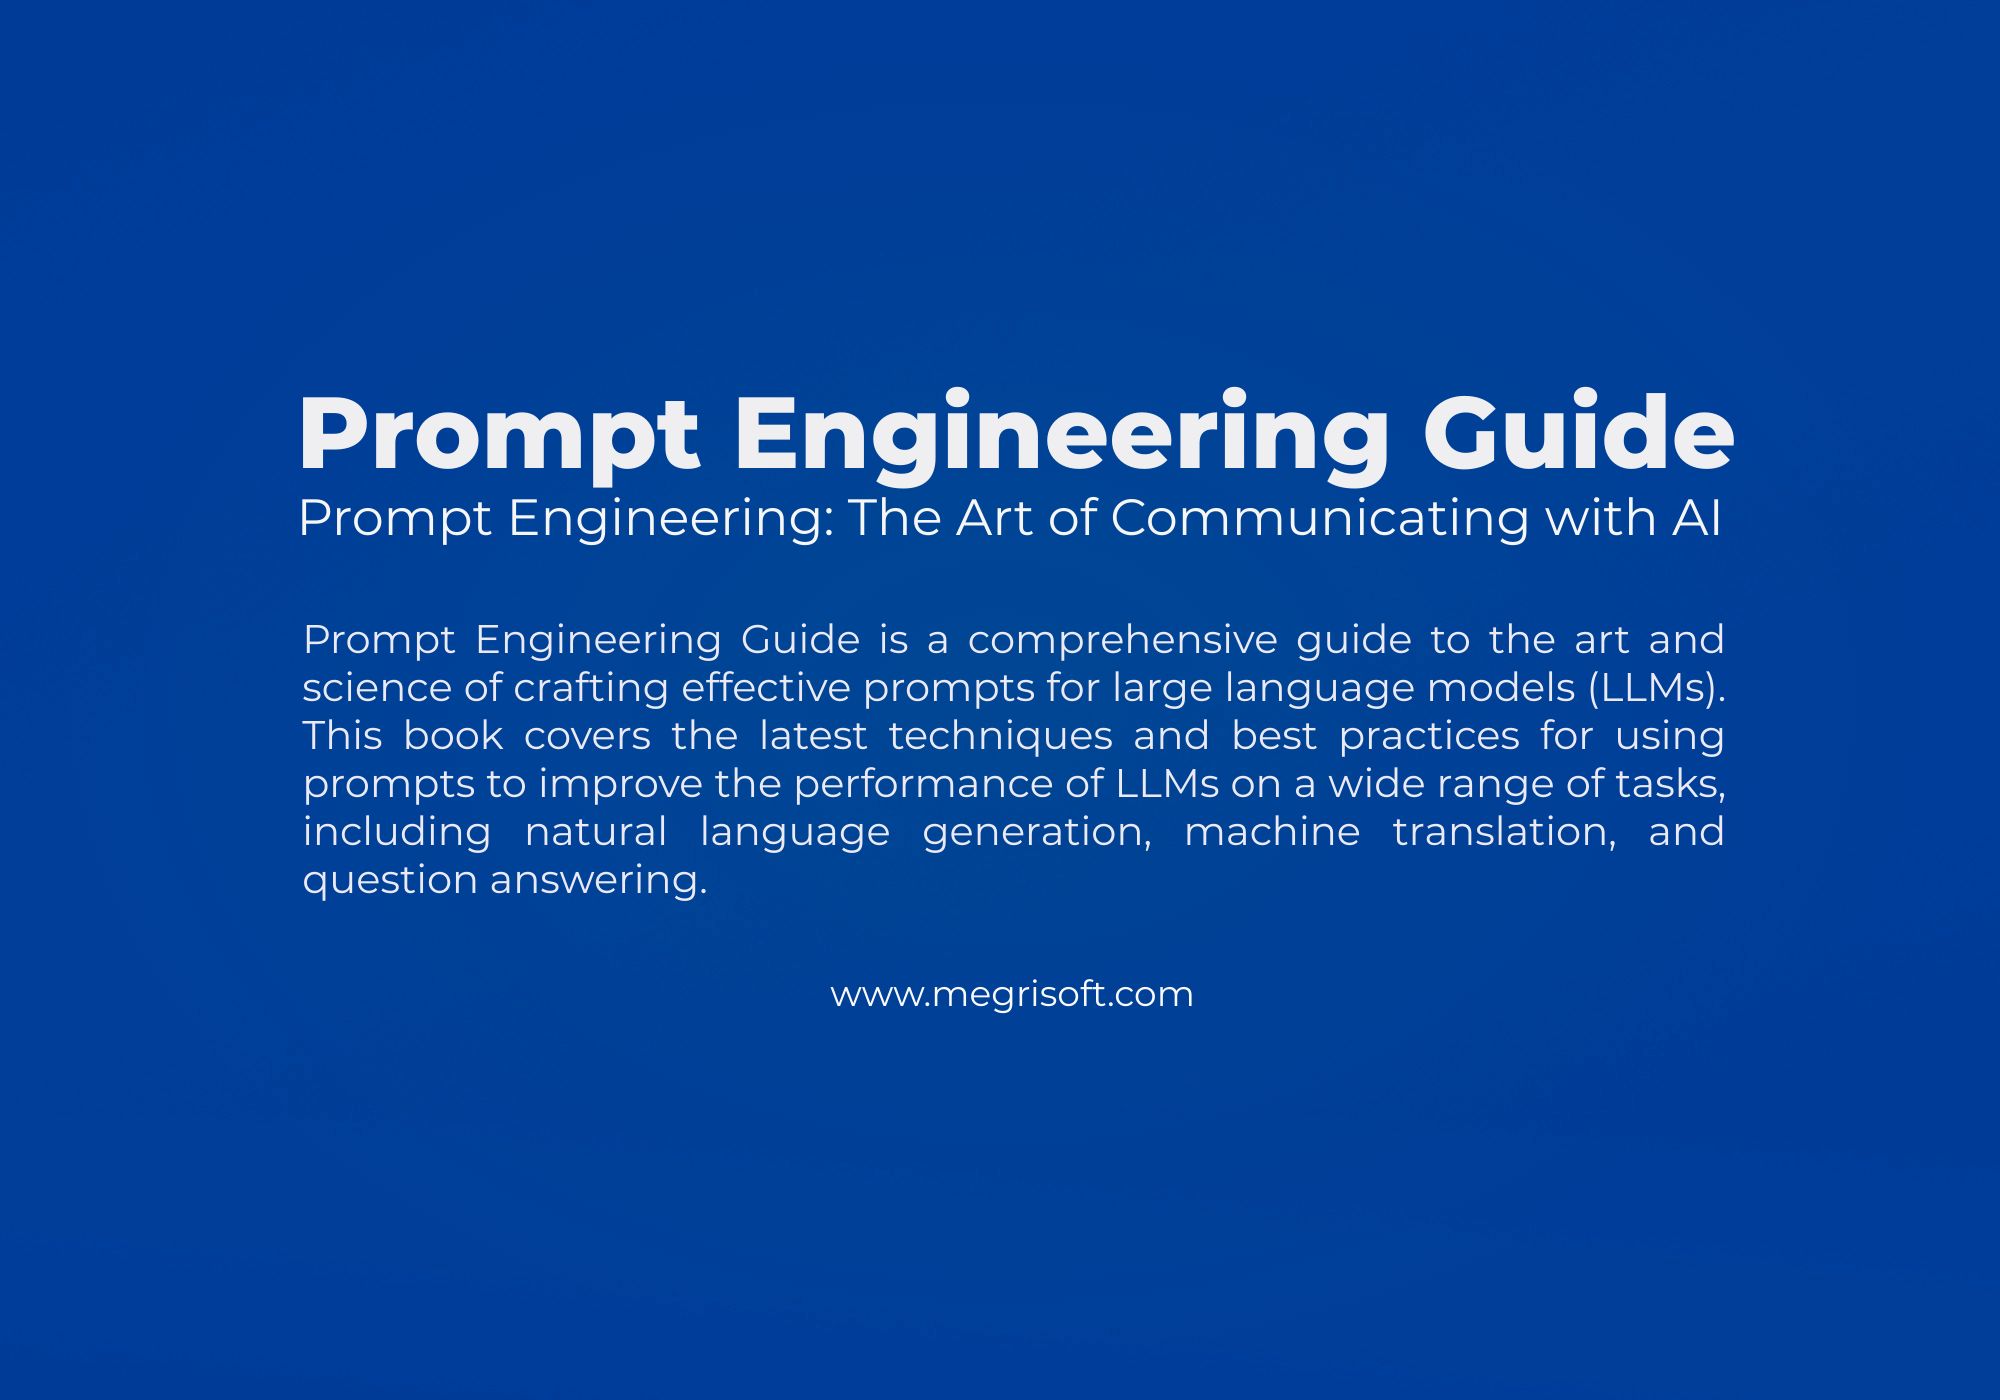 Prompt engineering guide